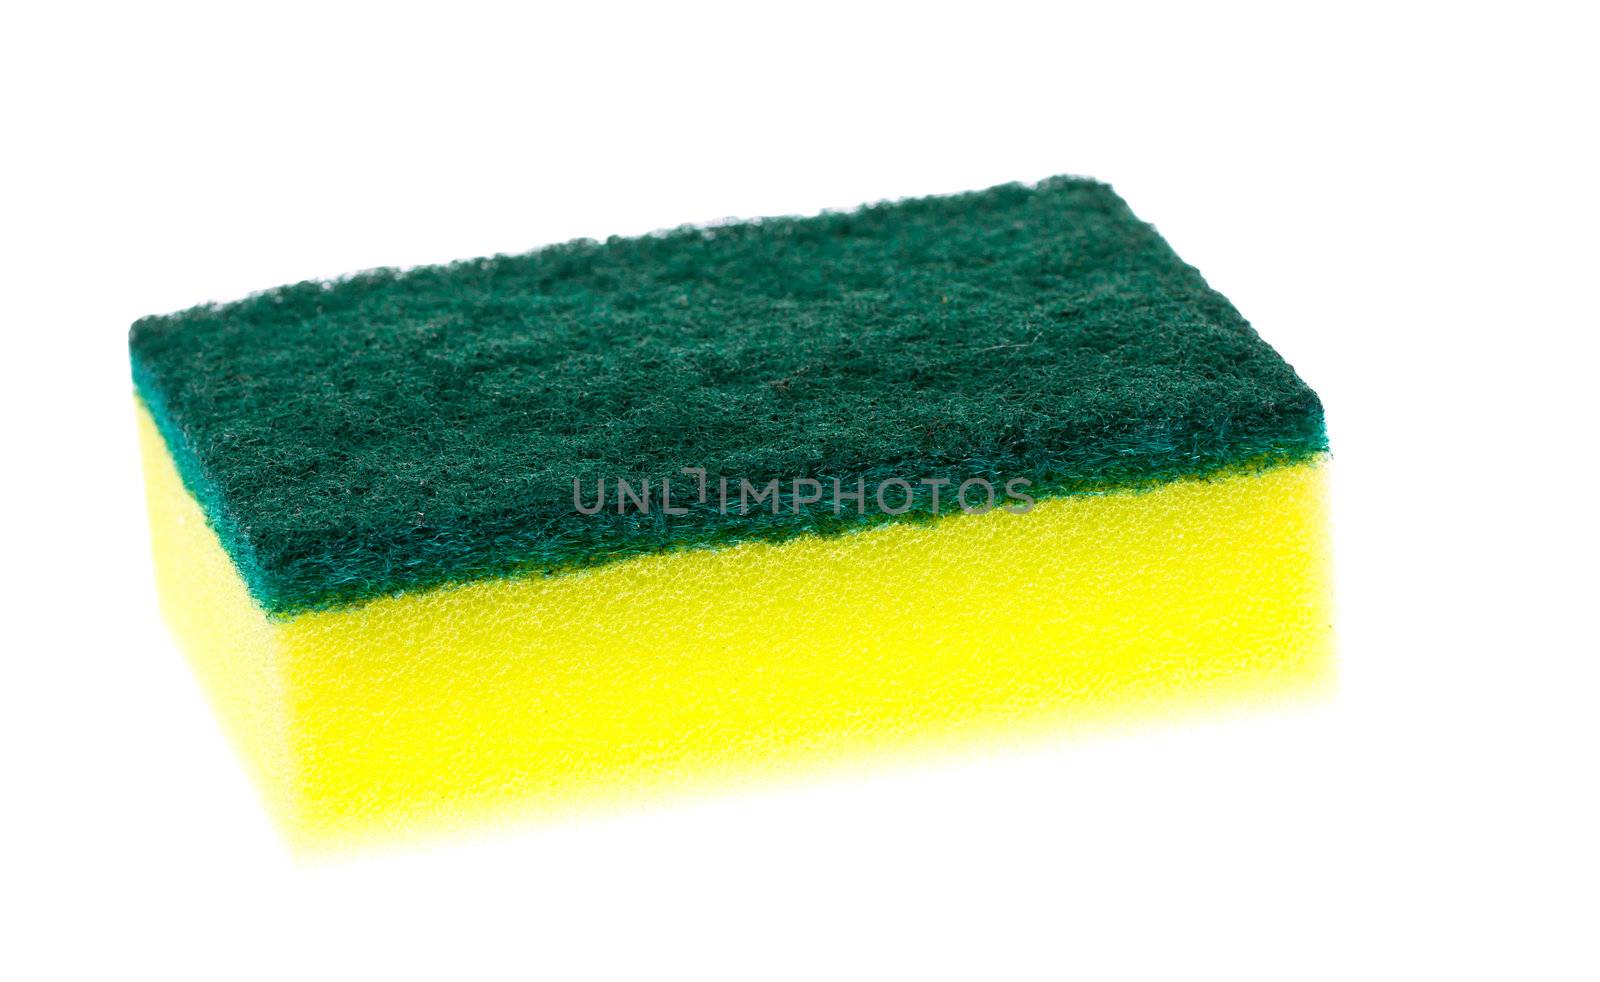 A new, clean and colorful yellow and green scrubber pad or scourer. Isolated over white with clipping path.